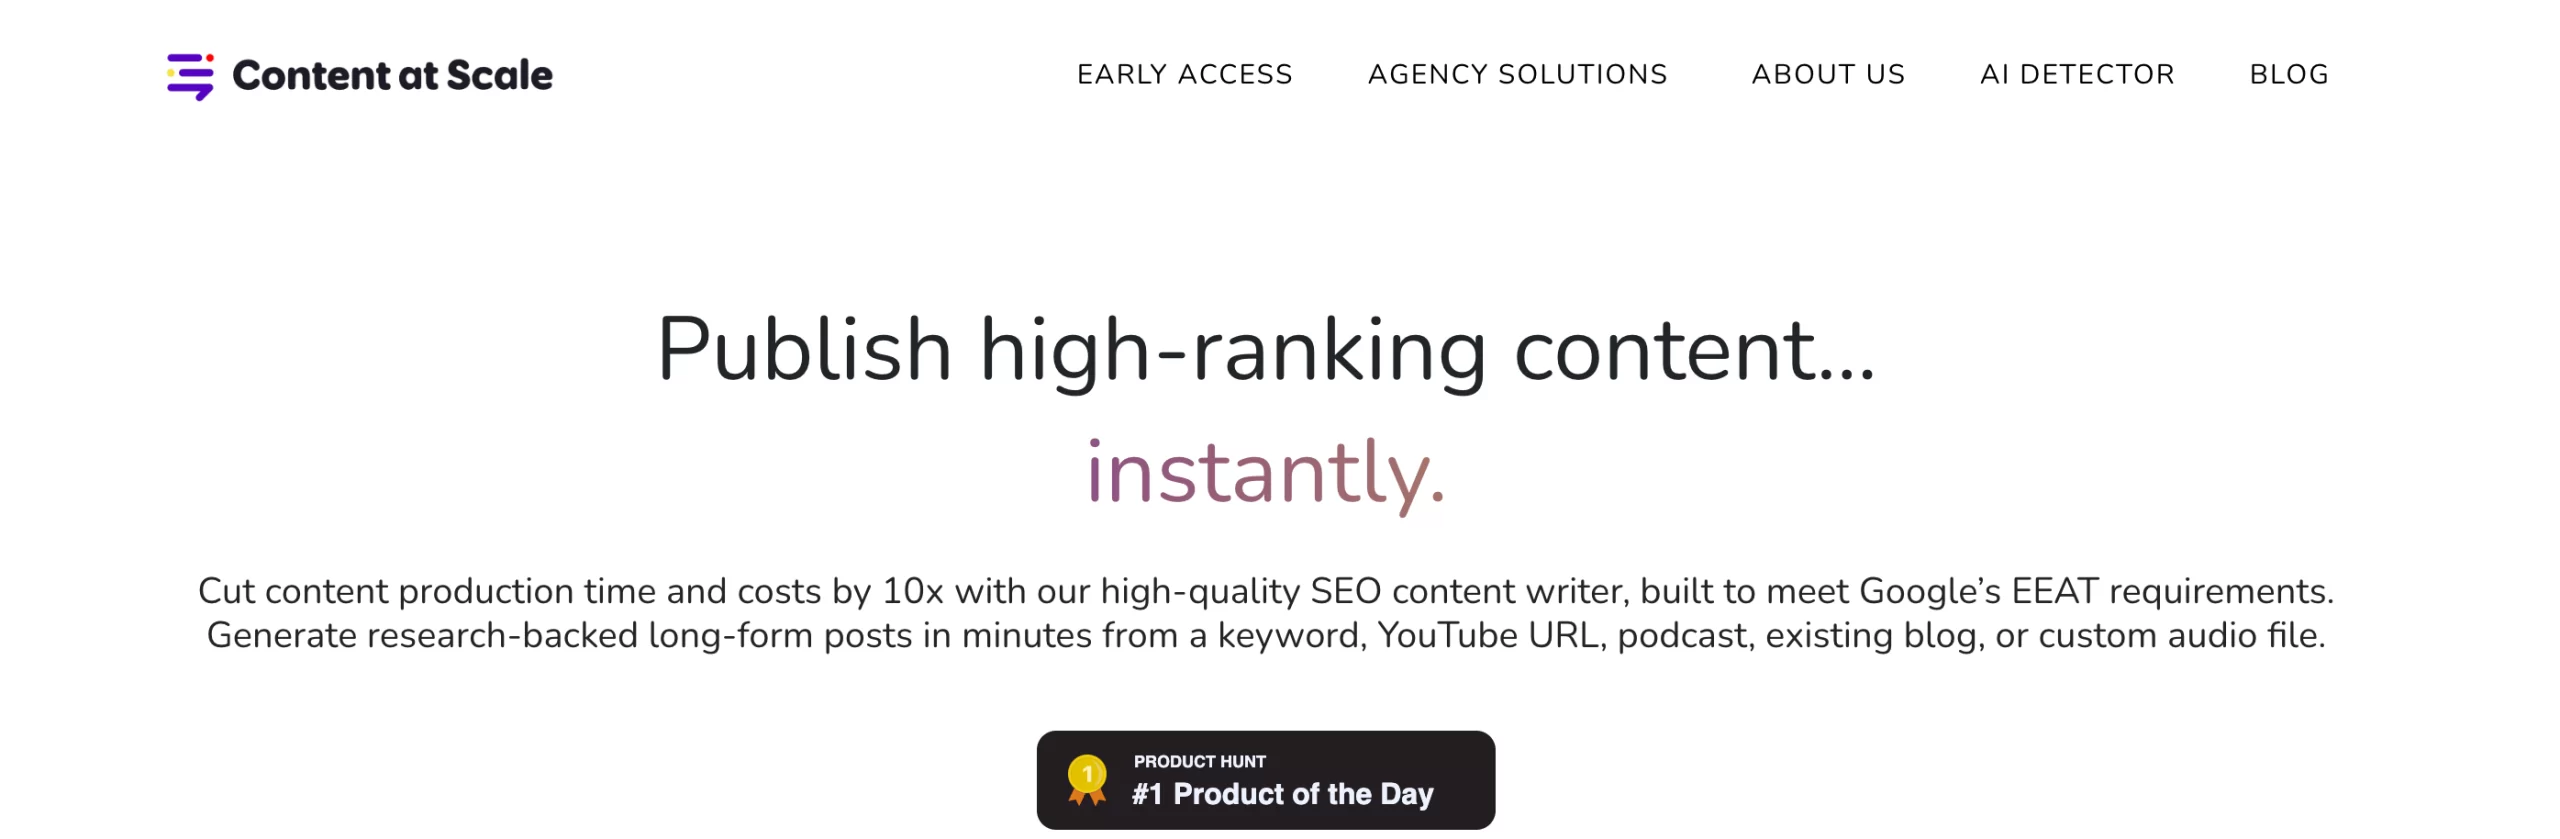 Content at scale's website homepage